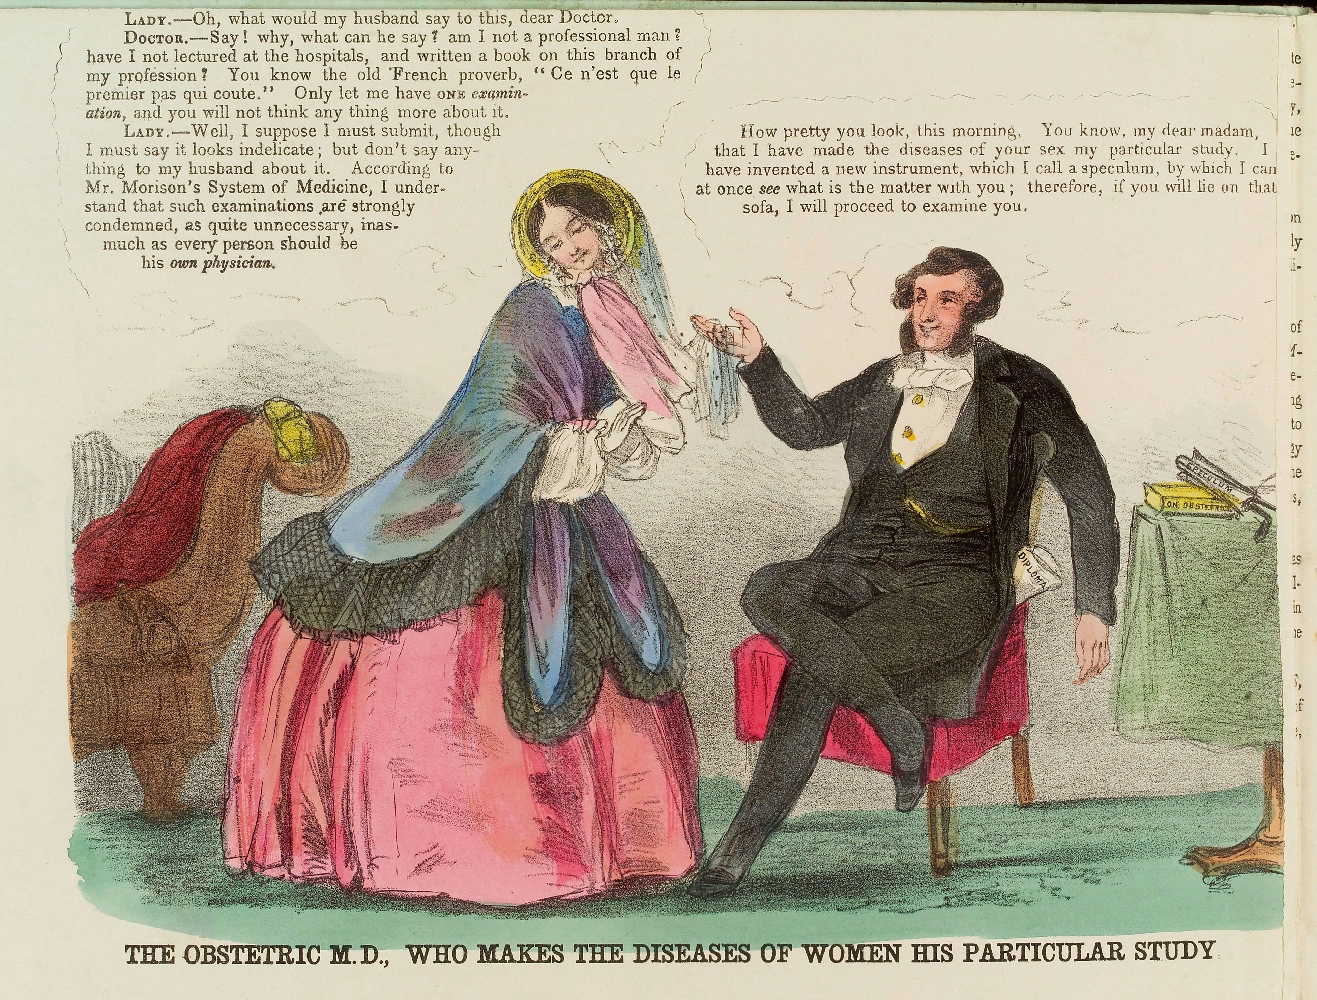 Coloured lithographic print, 1852 showing a seated man in formal black Victorian suit smiling and holding up the edge of the veil of the young woman standing infront of him. The woman in full Victorian skirts, a shawl and a circular bonnet tilts her head coyly and raised a hand in mild protest. To the right of the man is a table with a speculum resting on a book of obstetrics. The man is a doctor persuading his patient to have a vaginal examination using the "new instrument" he invented - the speculum.